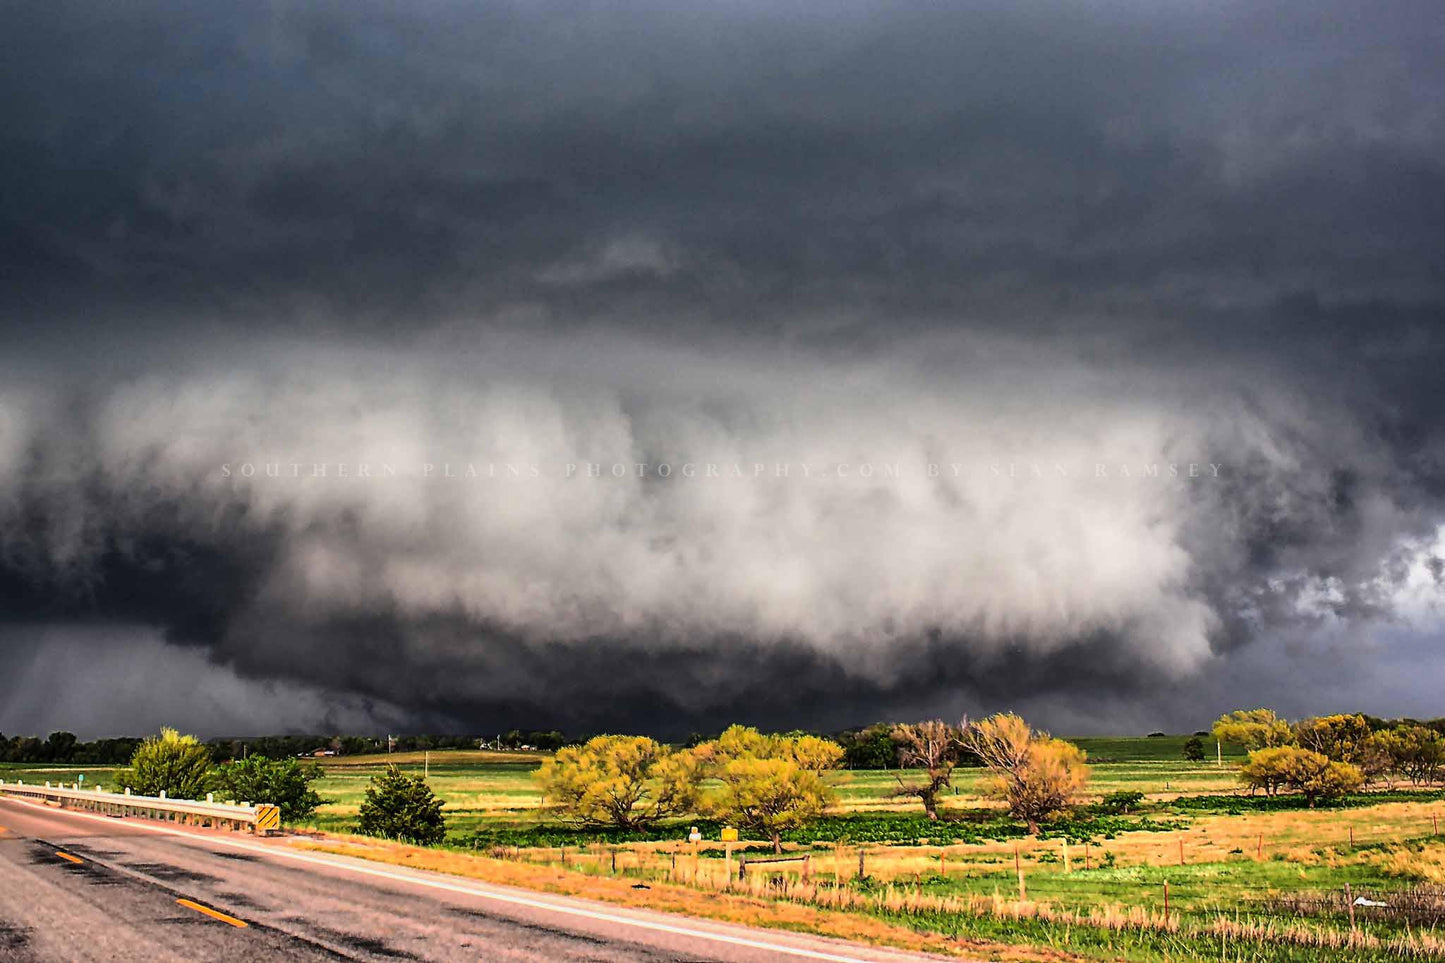 Storm photography print of a wide tornado touching down over a field on a stormy spring day in Oklahoma by Sean Ramsey of Southern Plains Photography.